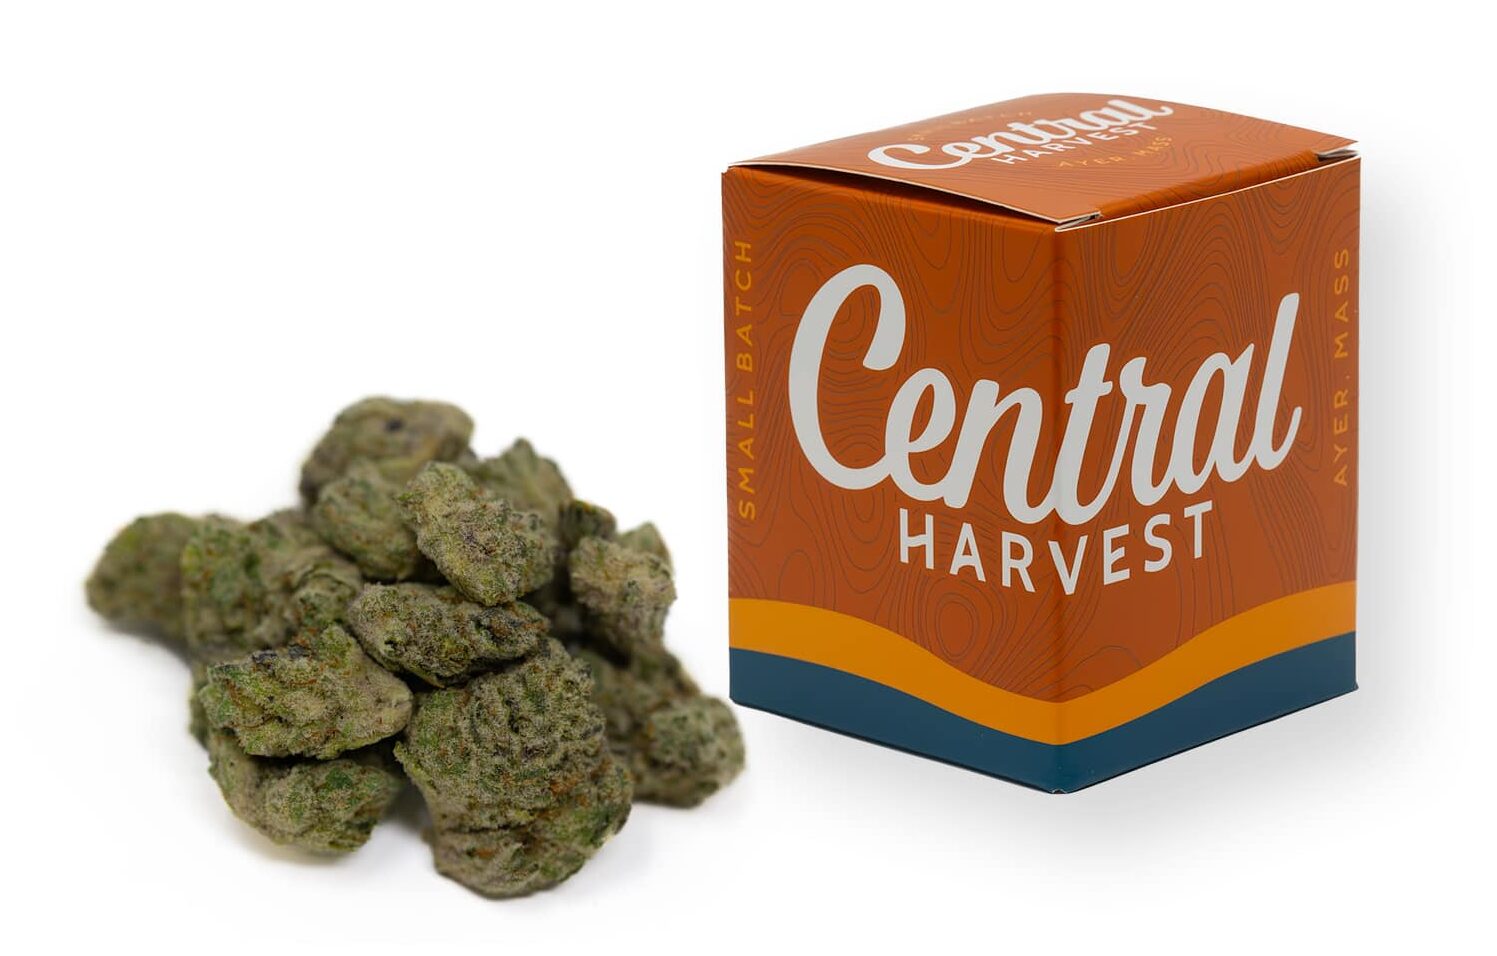 Bread & Butter a Hybrid Cannabis strain grown at Central Harvest